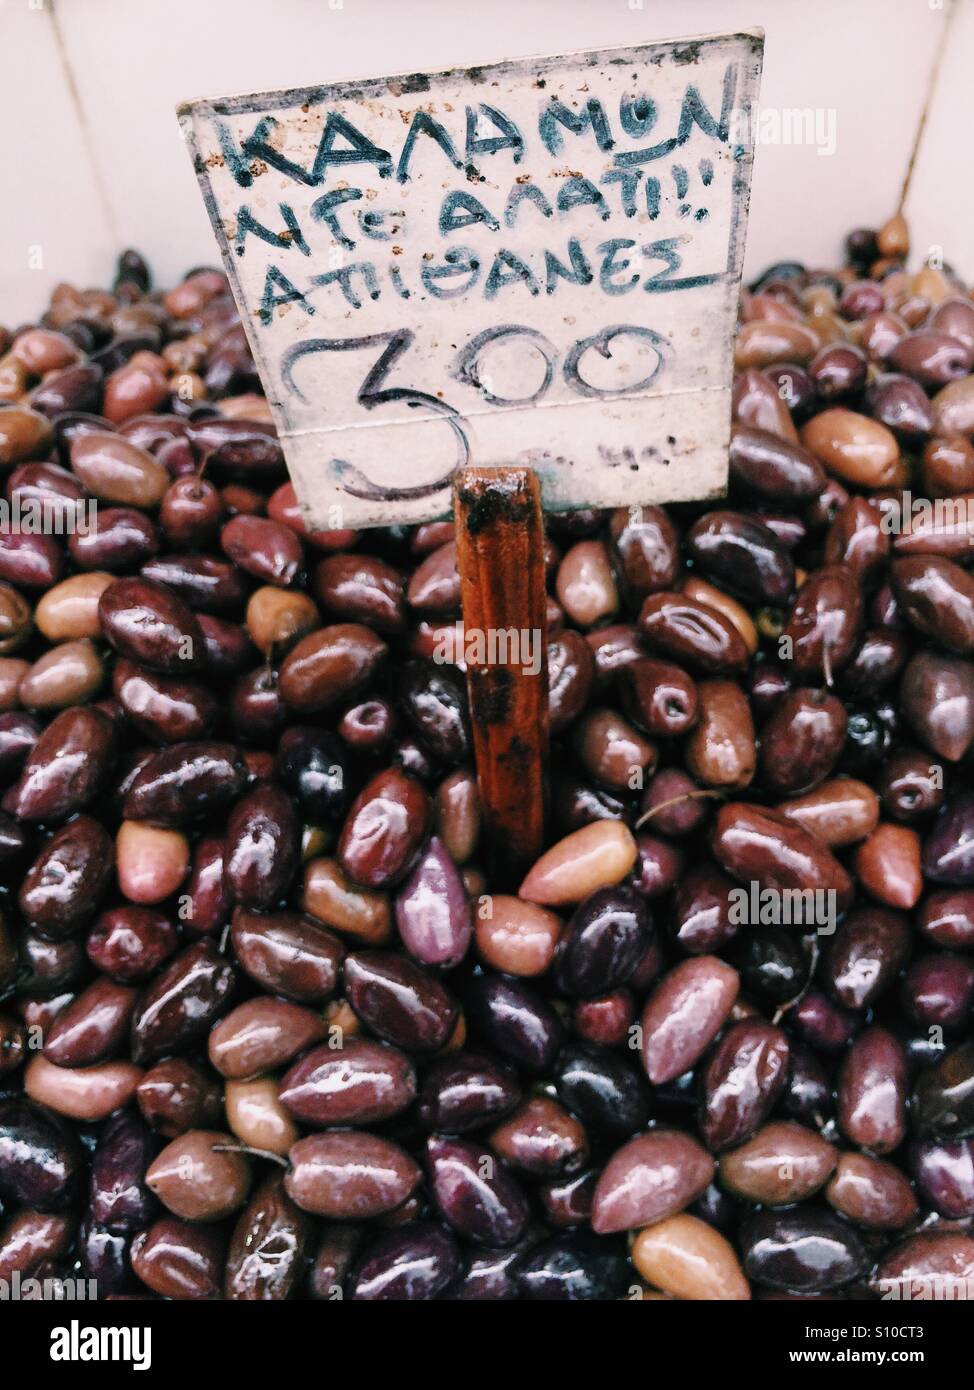 Kalamata olives for sale at a market stall in central Athens, Greece. Stock Photo